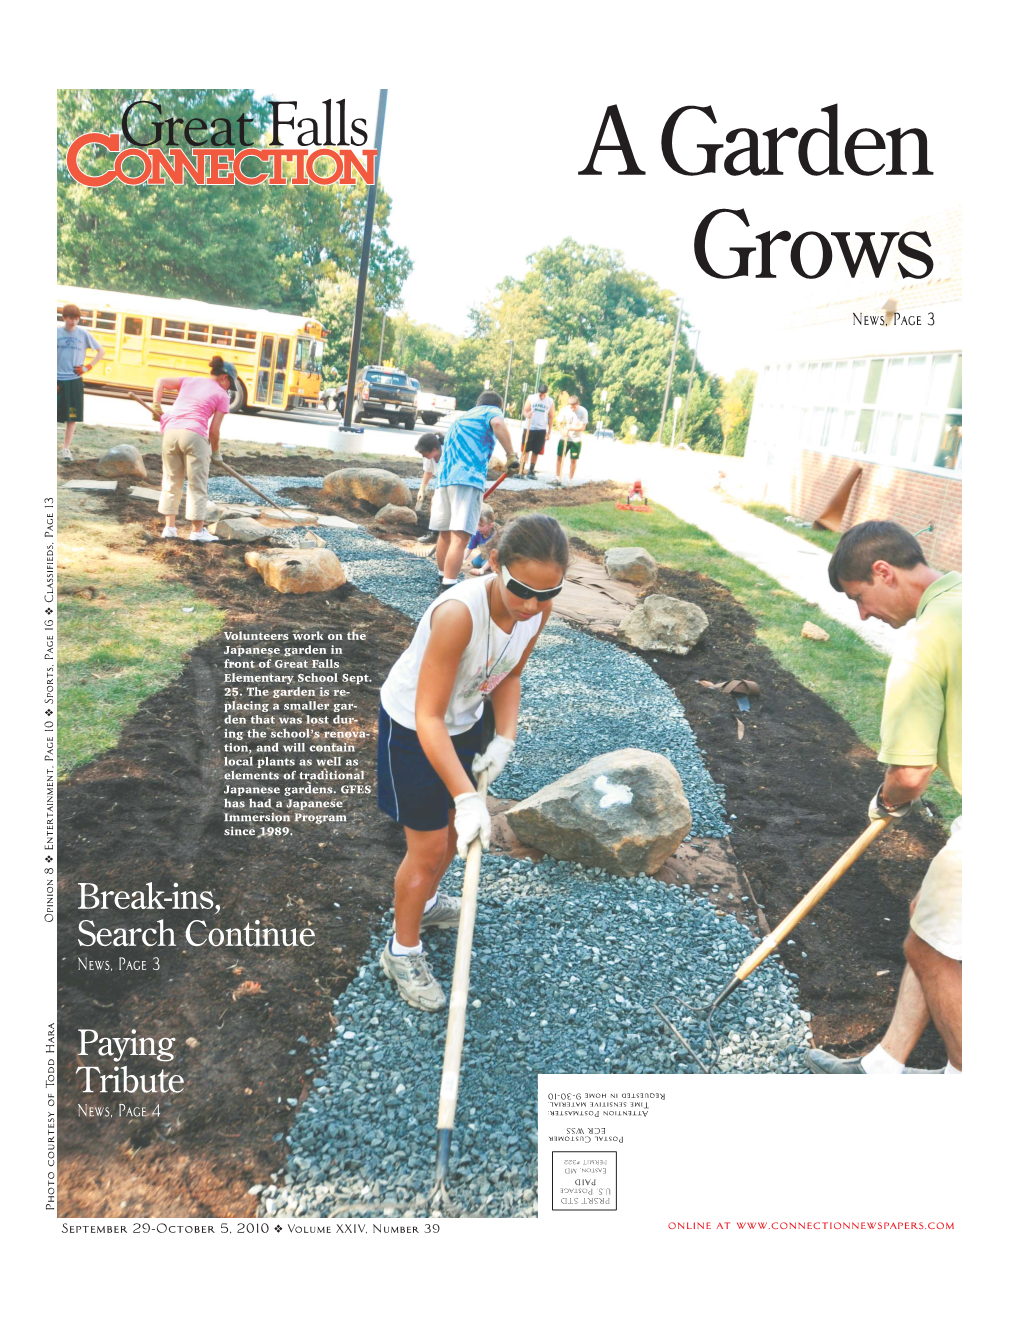 Great Falls a Garden Grows News, Page 3